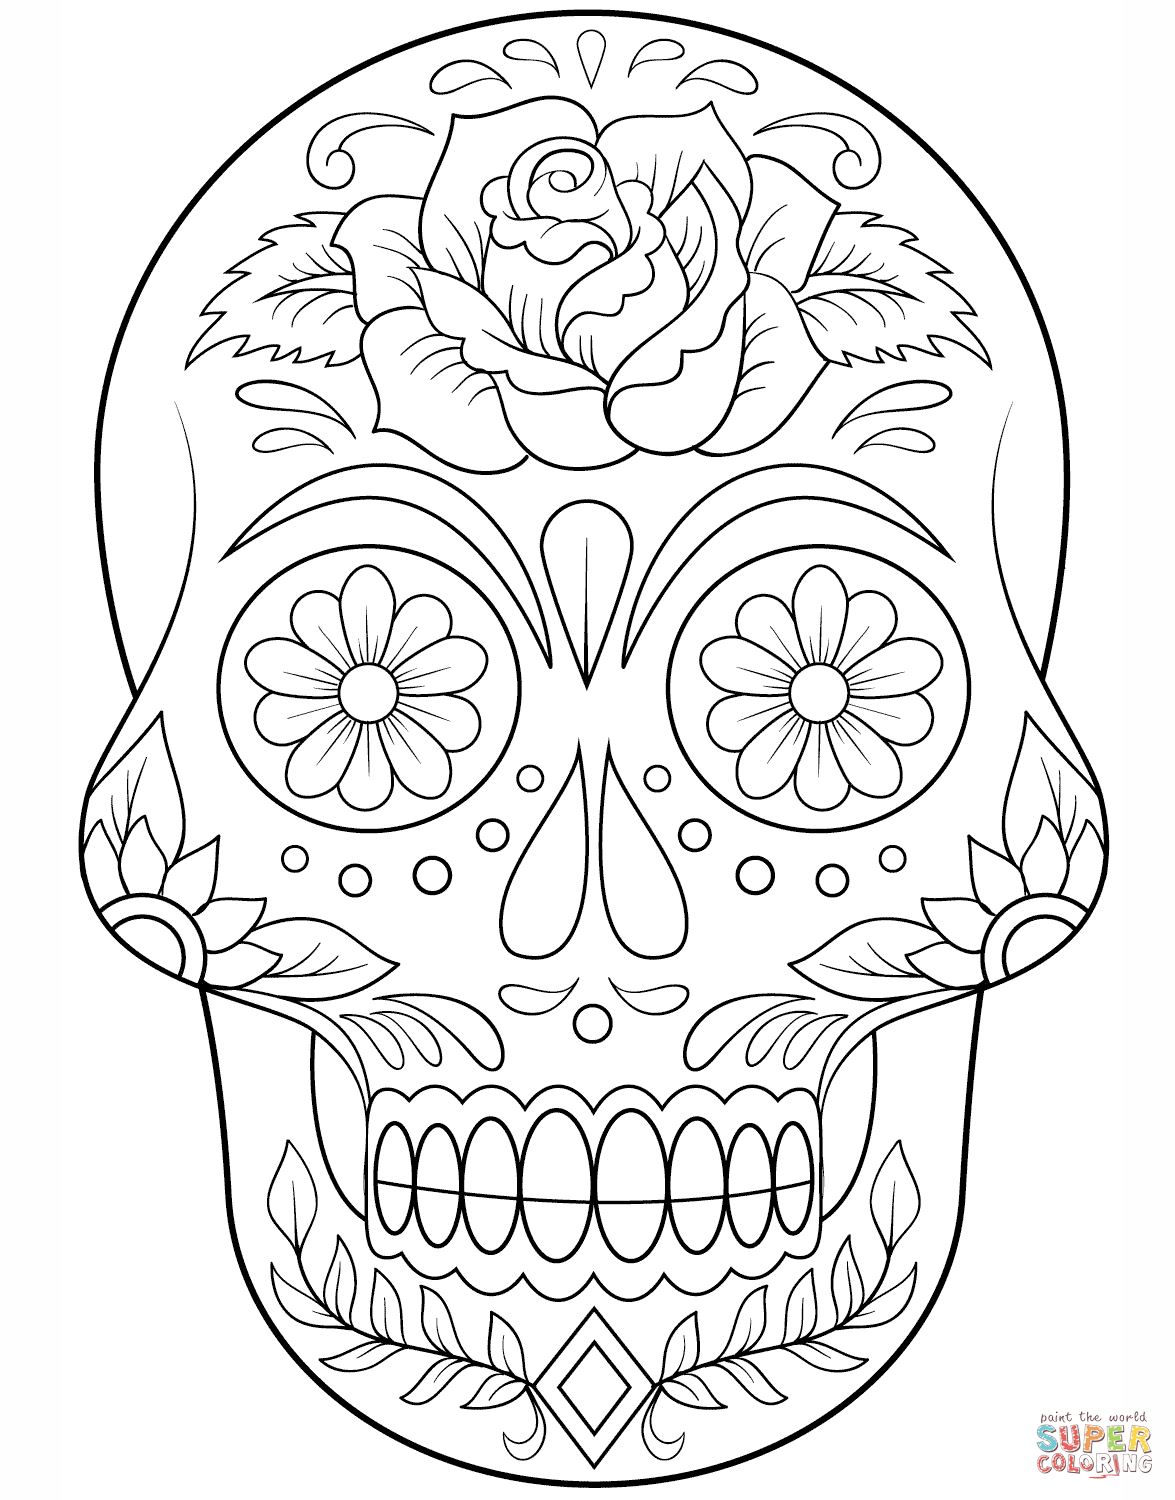 Sugar Skull with Flowers coloring page | Free Printable Coloring Pages